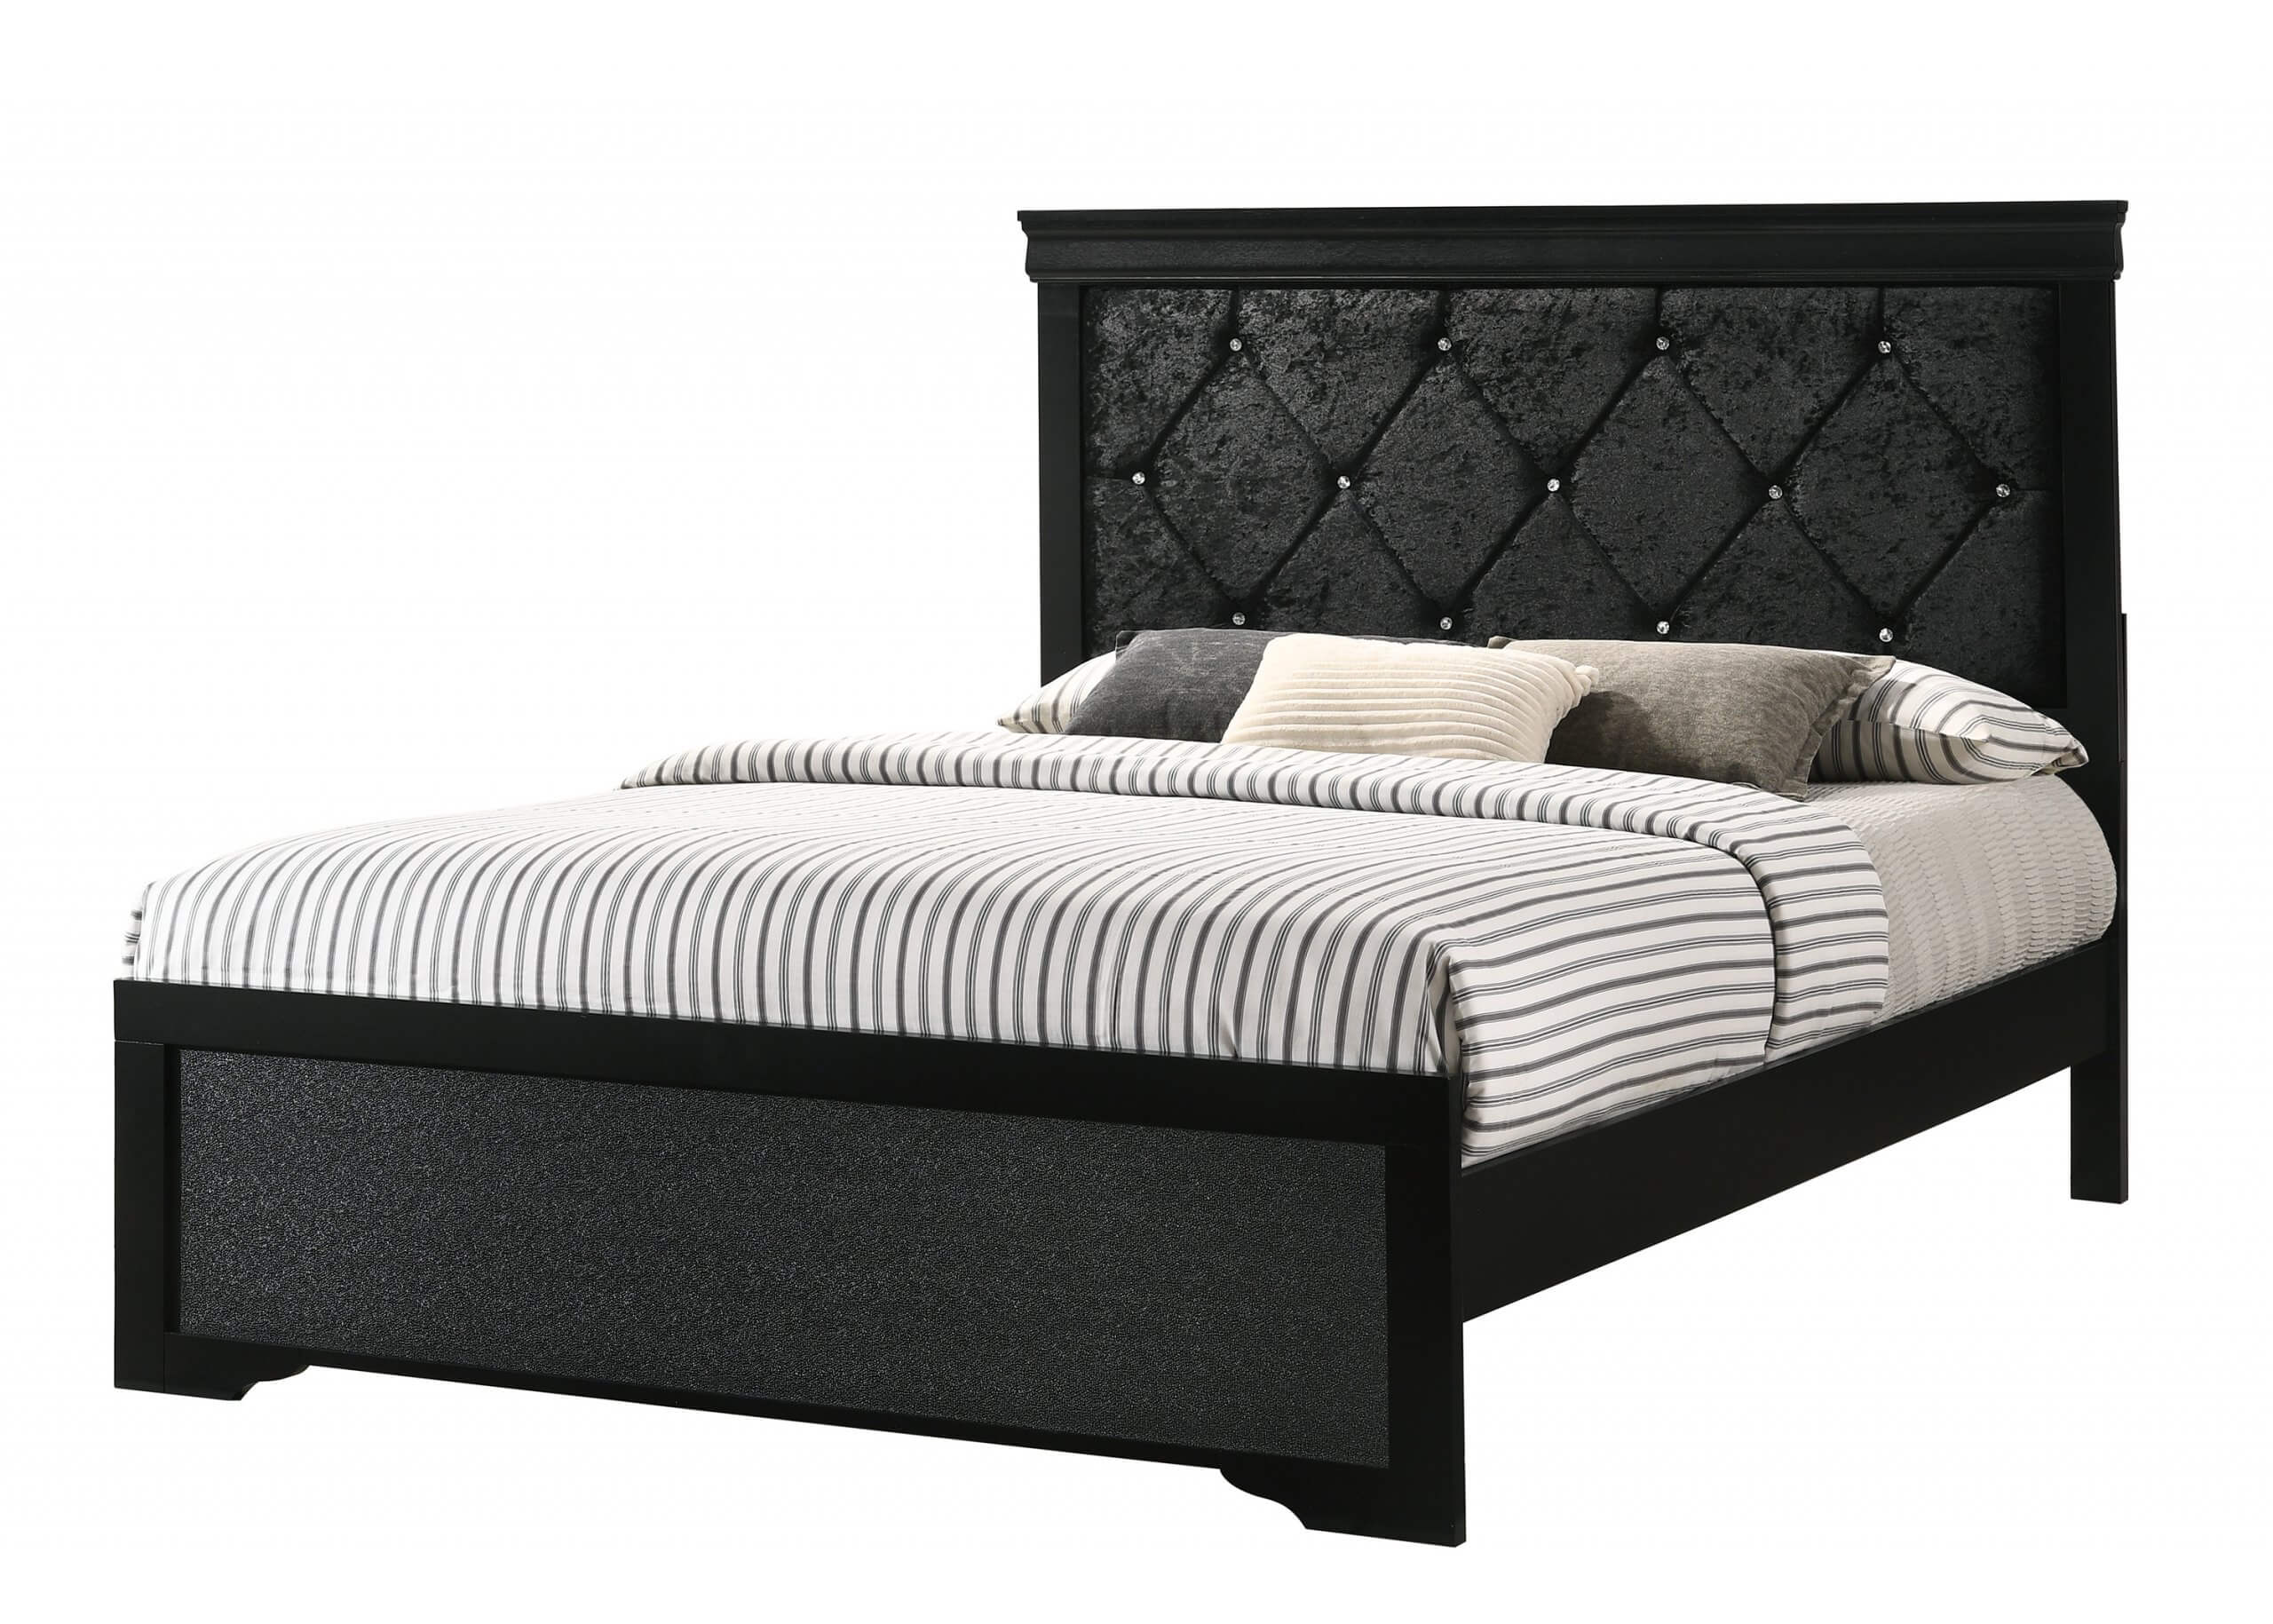 Amalia Black King Sleigh Bed By Crown, Black King Size Sleigh Bed Frame